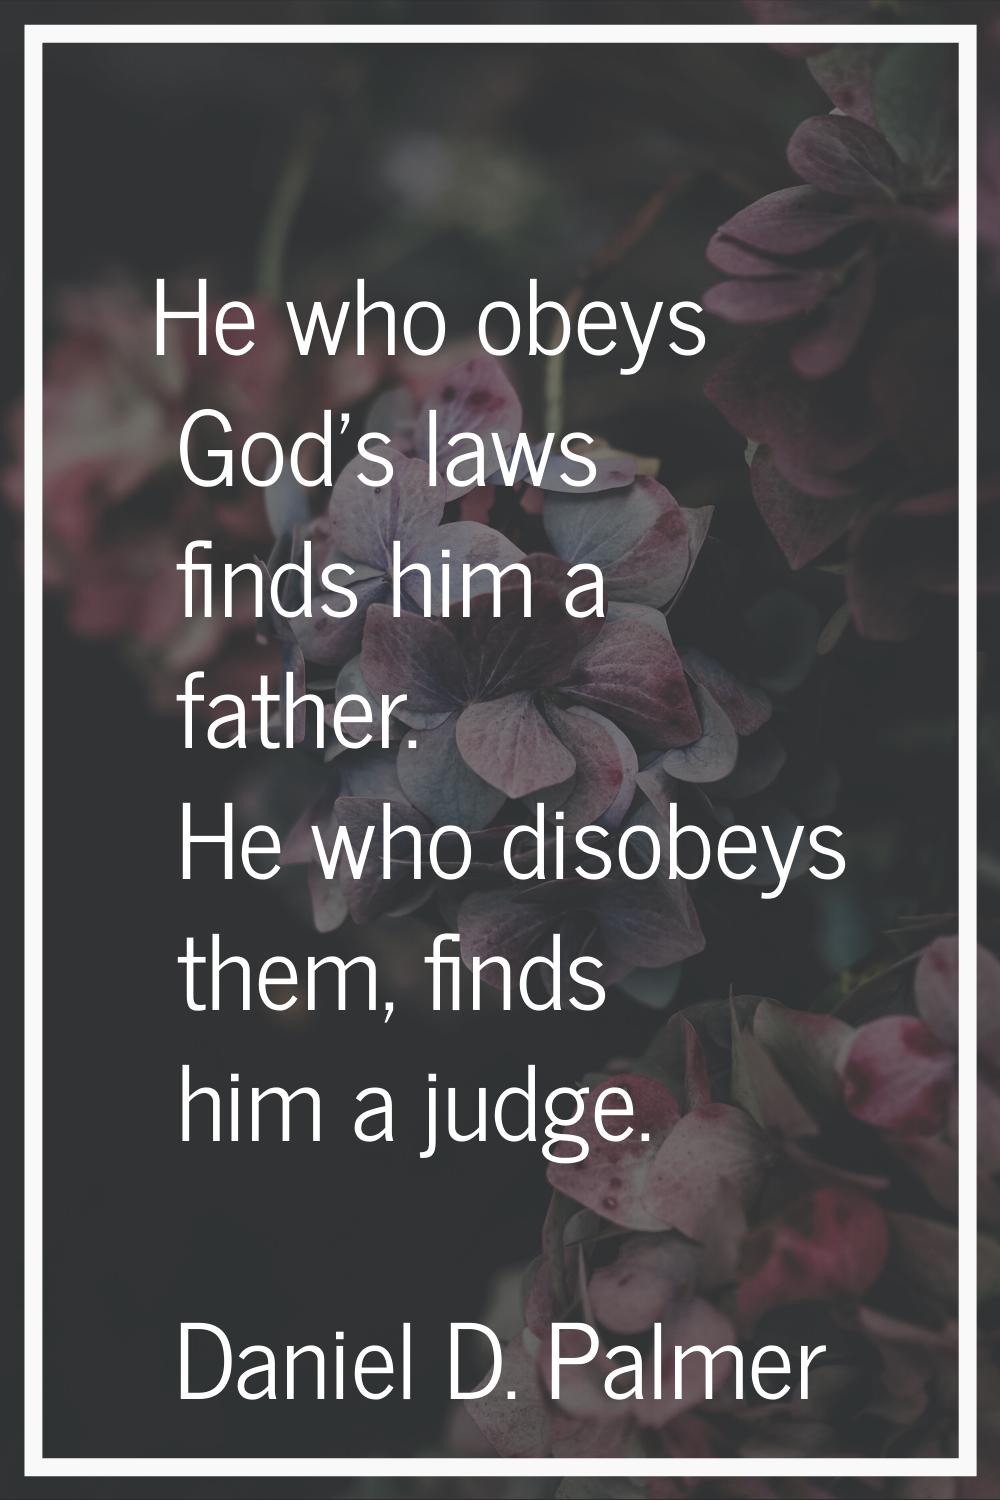 He who obeys God's laws finds him a father. He who disobeys them, finds him a judge.